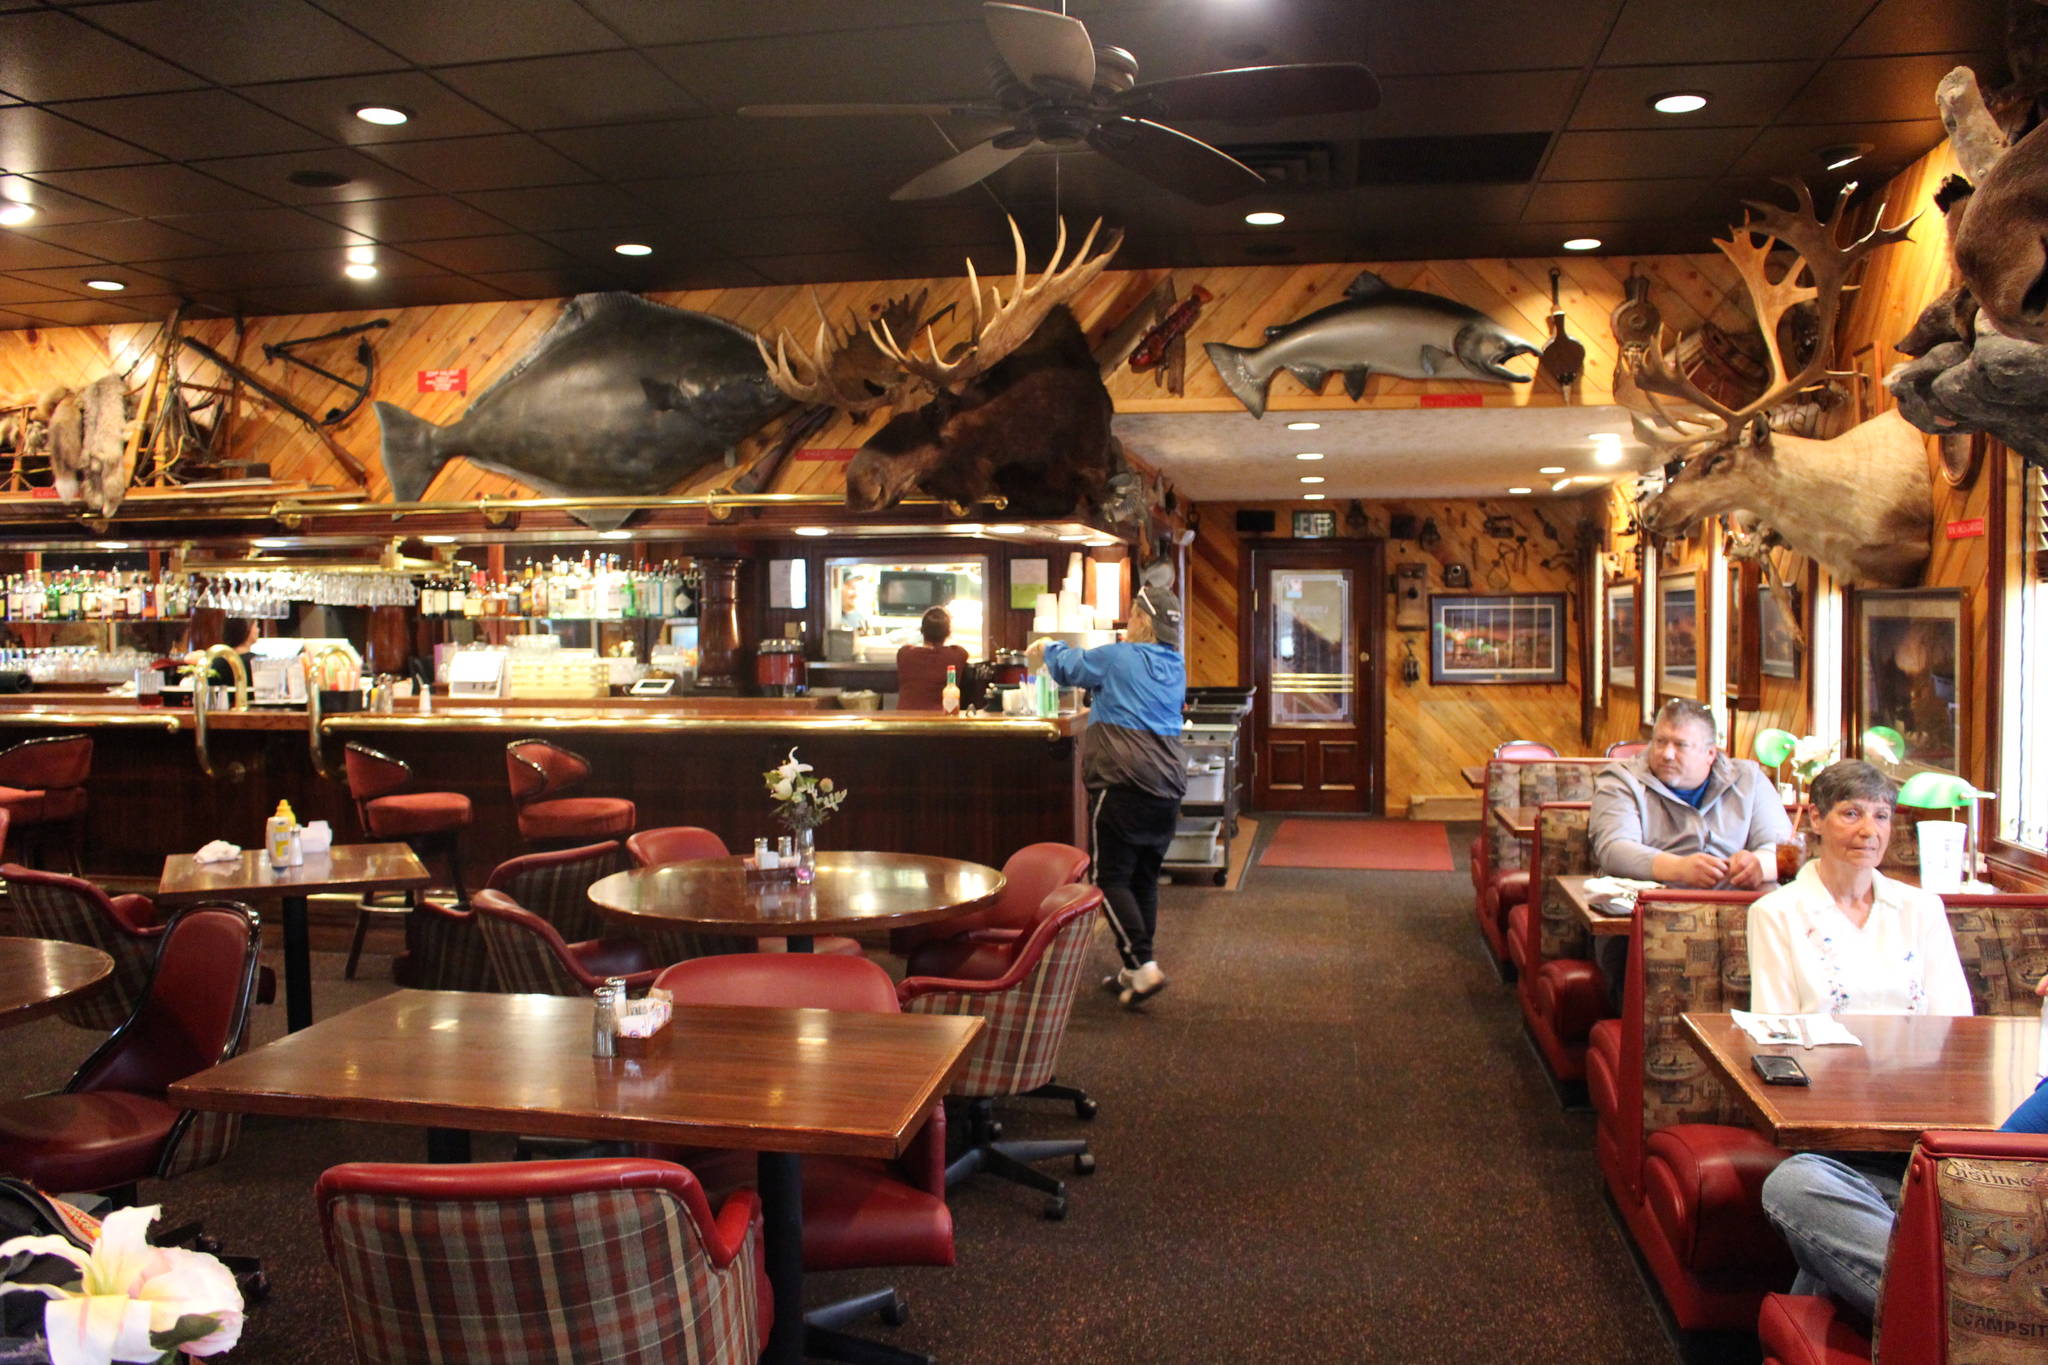 Kenai Peninsula residents eat inside Louie’s Restaurant in Kenai, Alaska on May 8, 2020. Friday was the first day that restaurants around the state began opening for dine-in services without the need for a reservation. (Photo by Brian Mazurek/Peninsula Clarion)